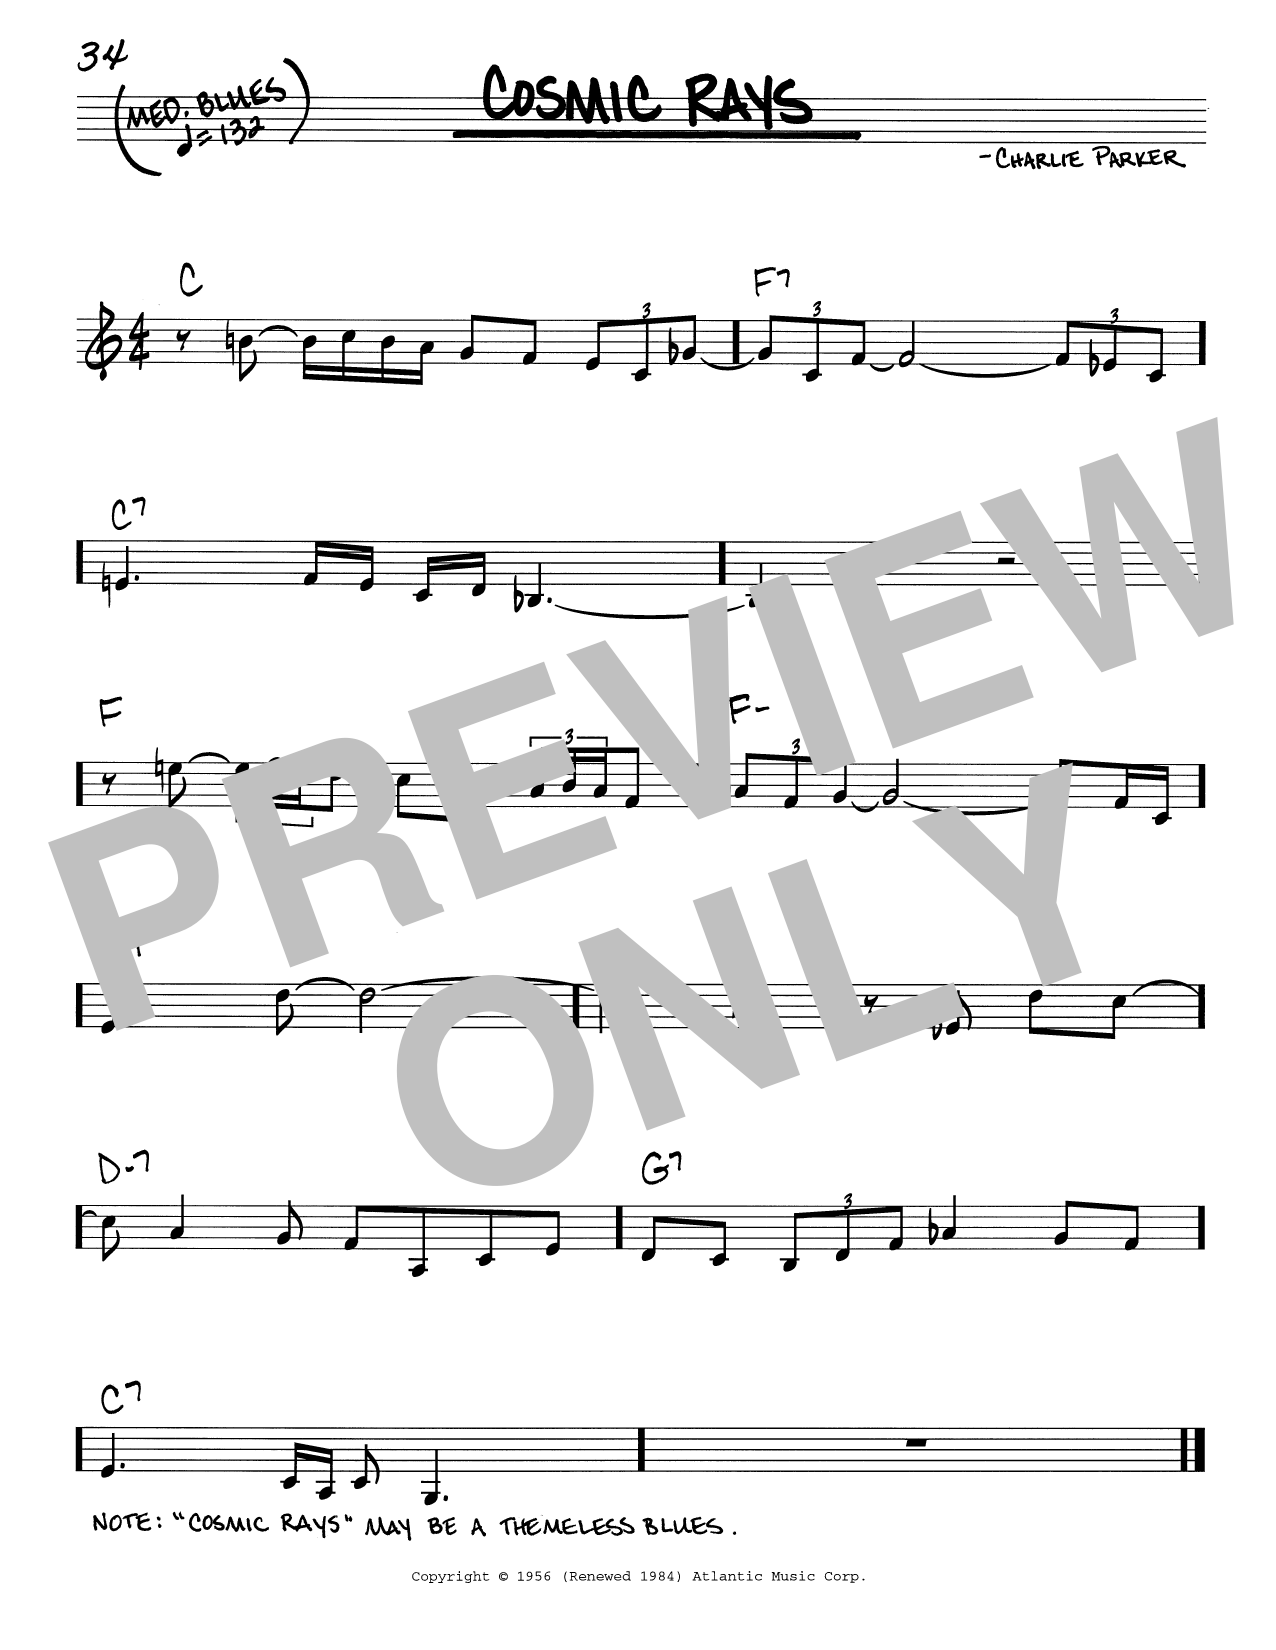 Download Charlie Parker Cosmic Rays Sheet Music